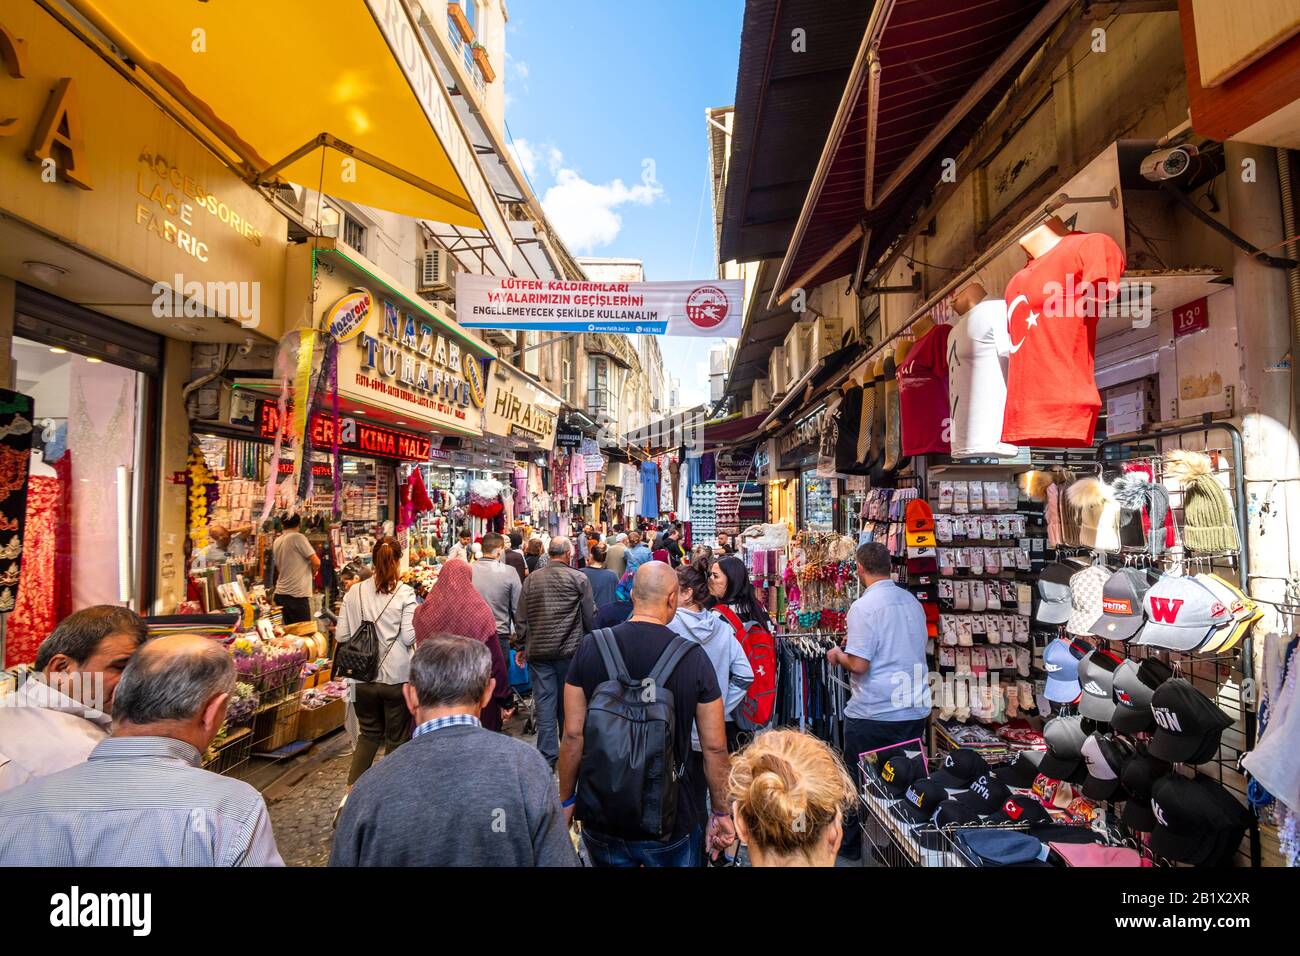 Local Turks spend a busy day shopping the narrow colorful alleys in the outdoor Eminonu Bazaar Marketplace in Istanbul, Turkey. Stock Photo